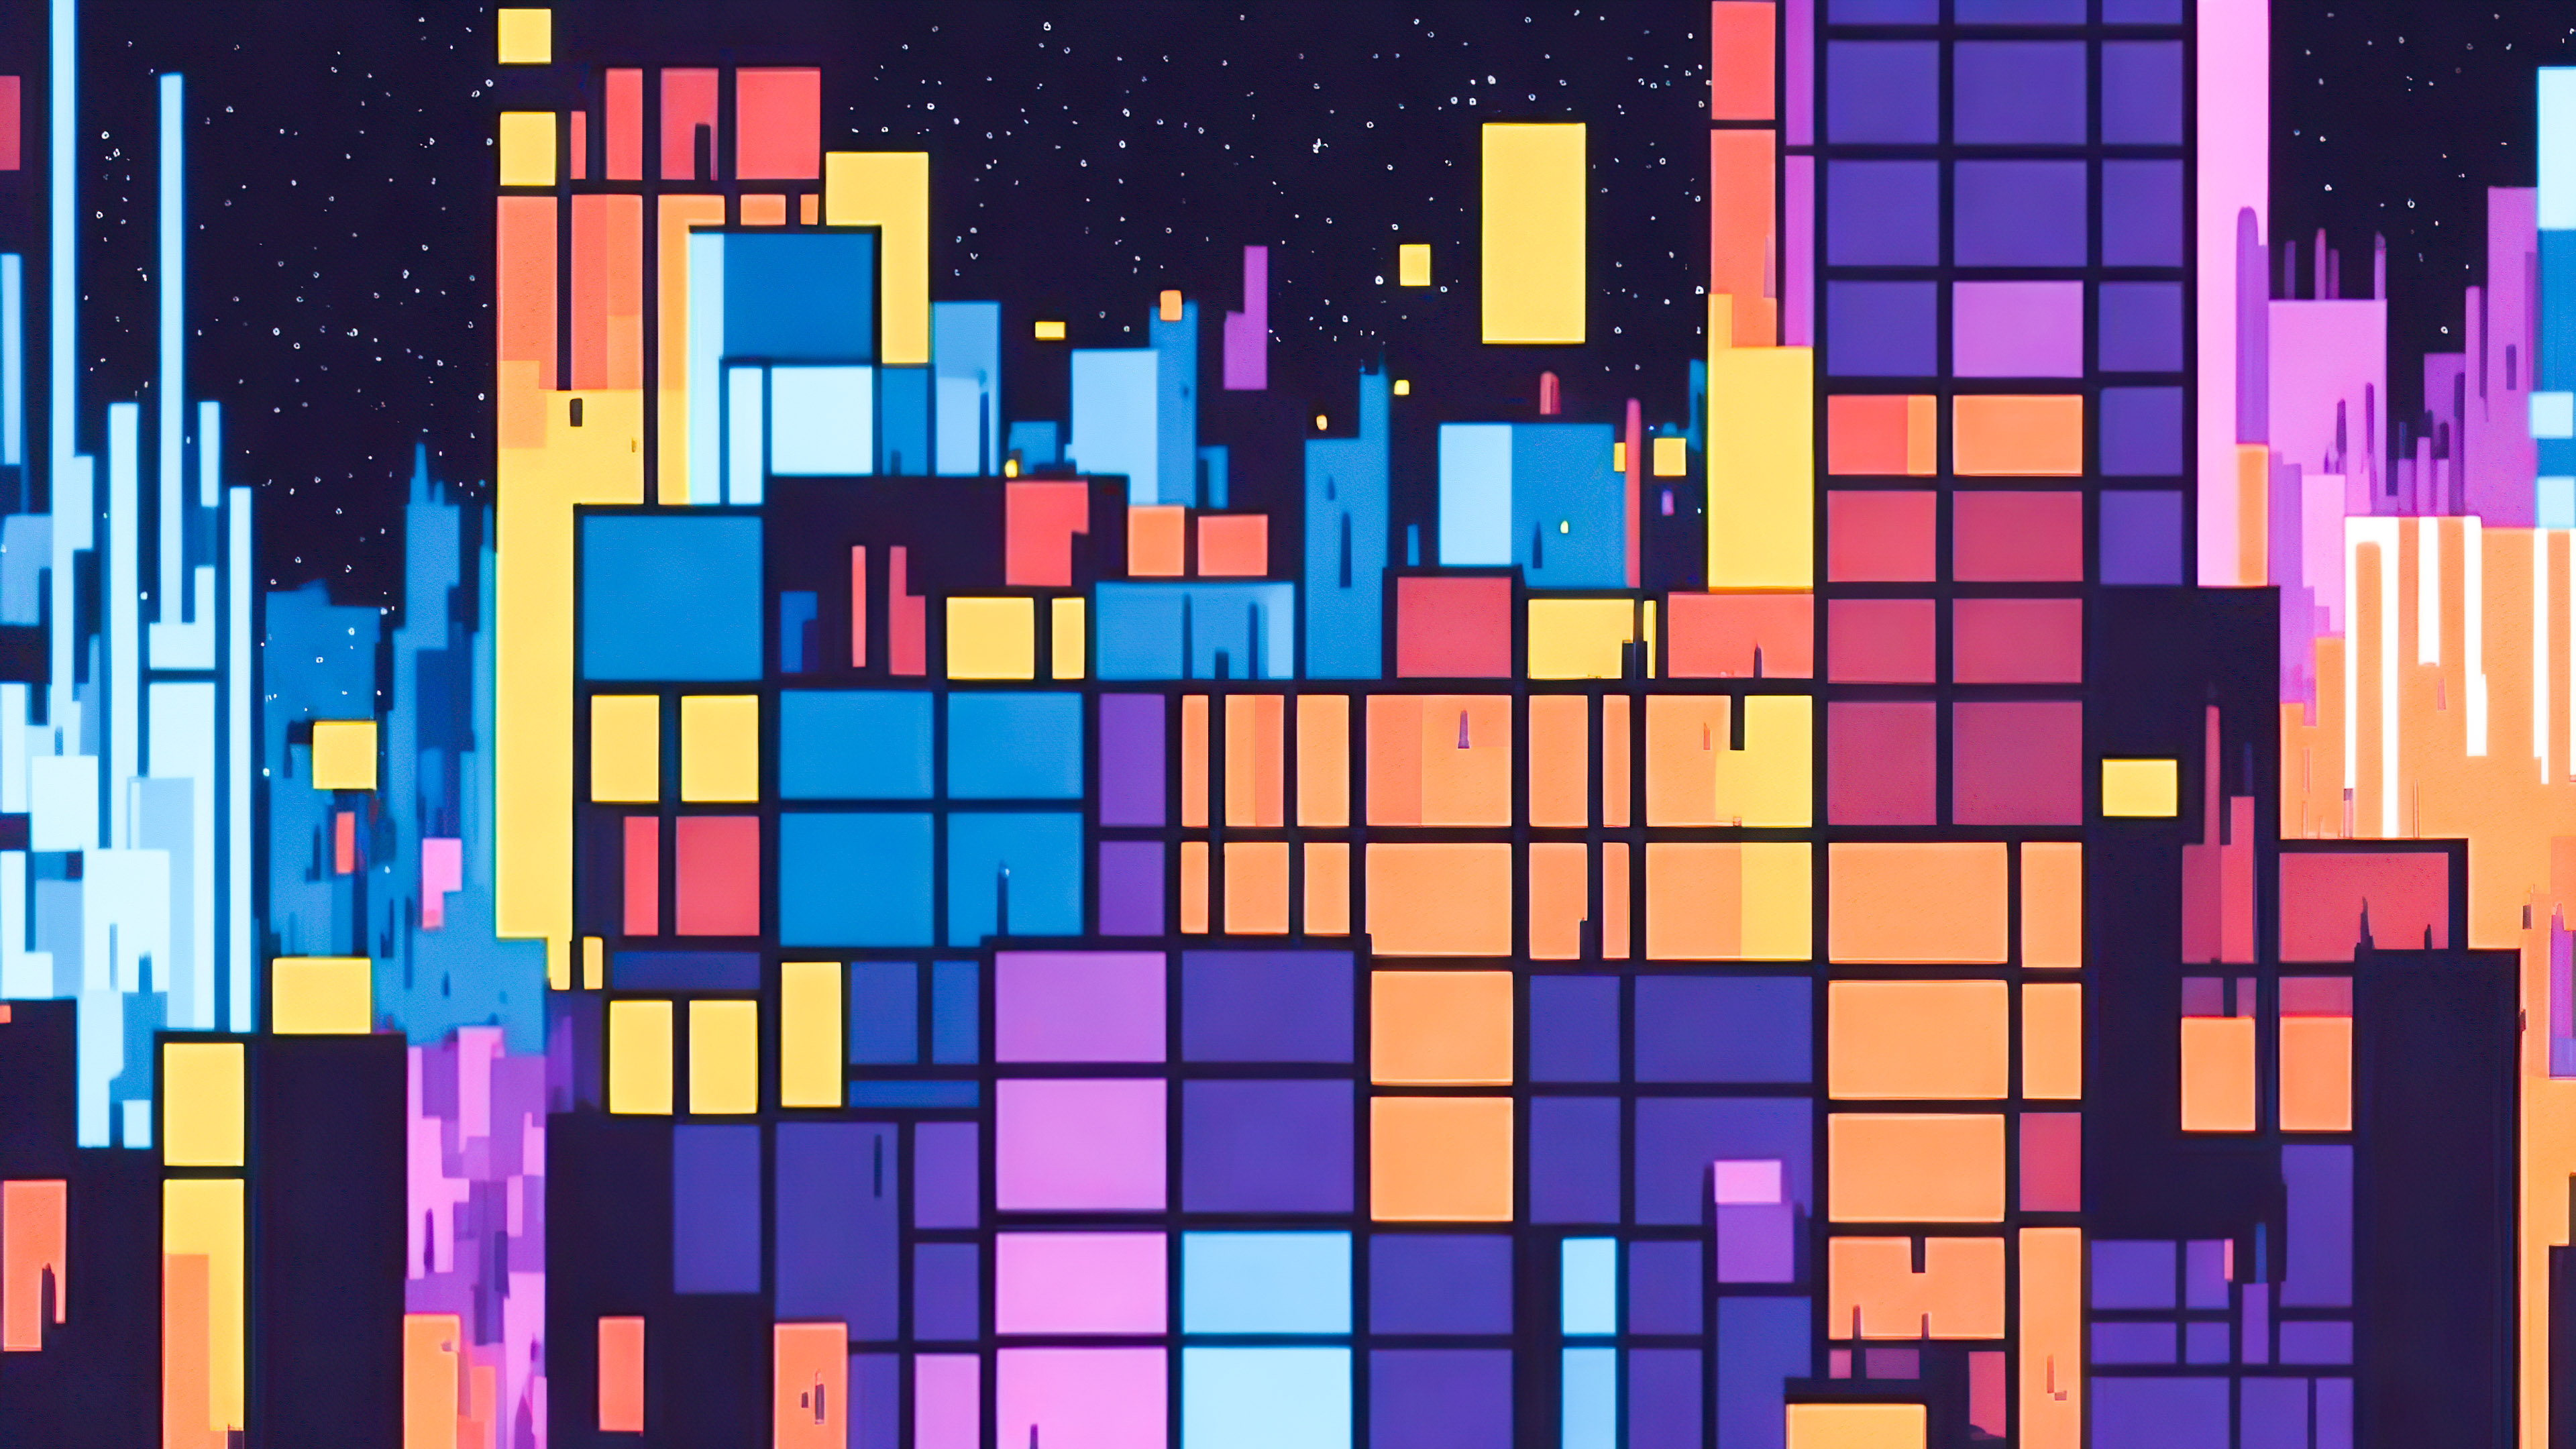 Enrich your desktop with a 4K abstract art wallpaper, featuring a composition of vibrant squares and rectangles.